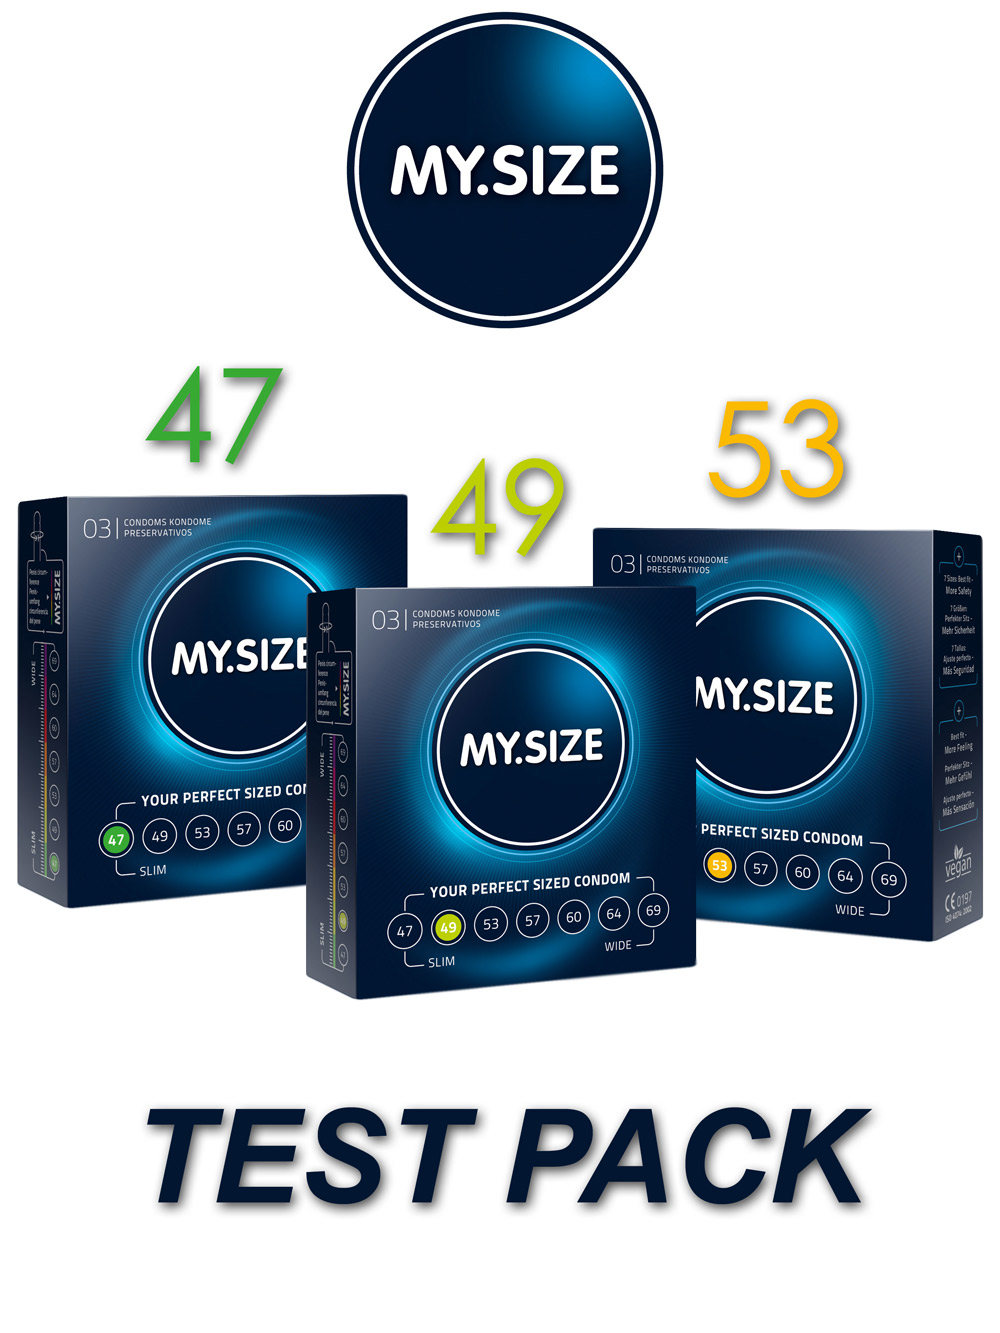 MY.SIZE TEST PACK 1